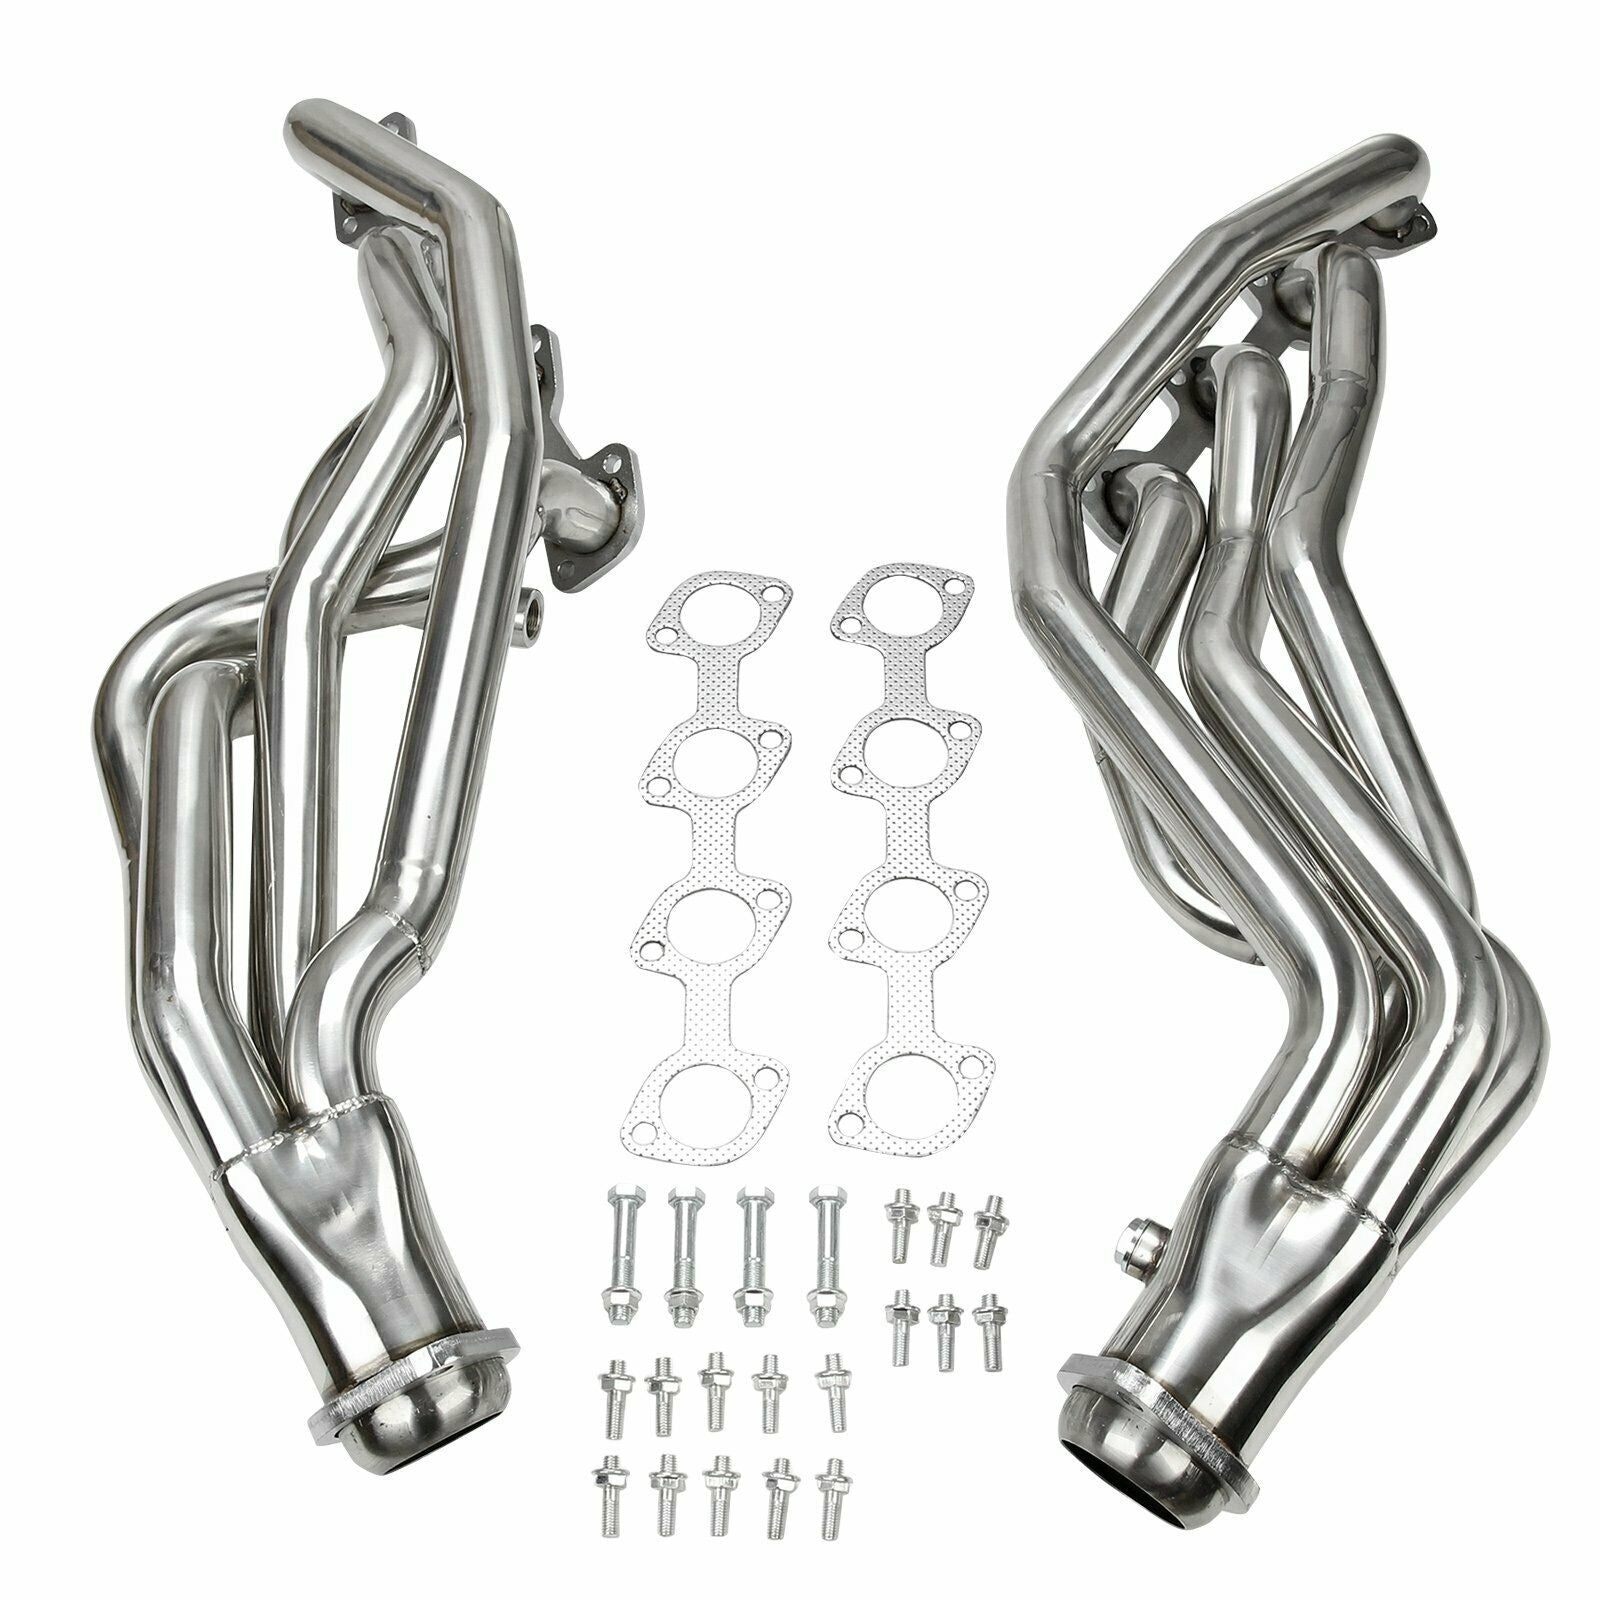 Stainless Steel Exhaust Manifold Header for Ford Mustang GT 4.6 V8 96-04